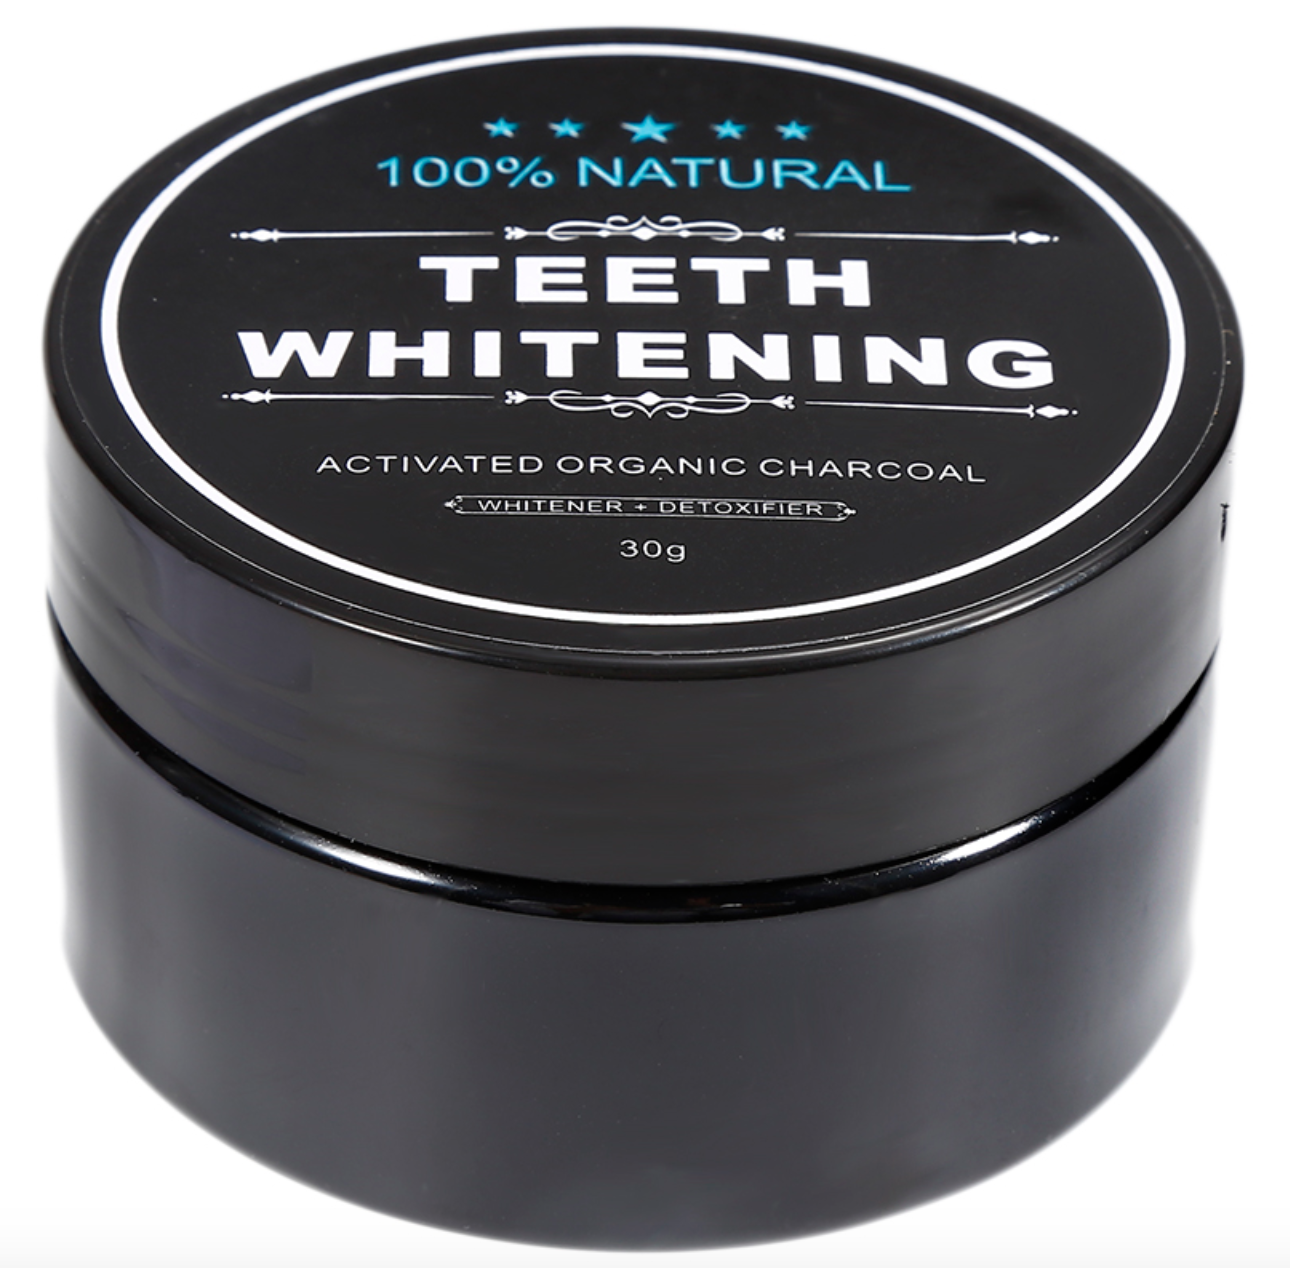 Activated Charcoal Toothpaste